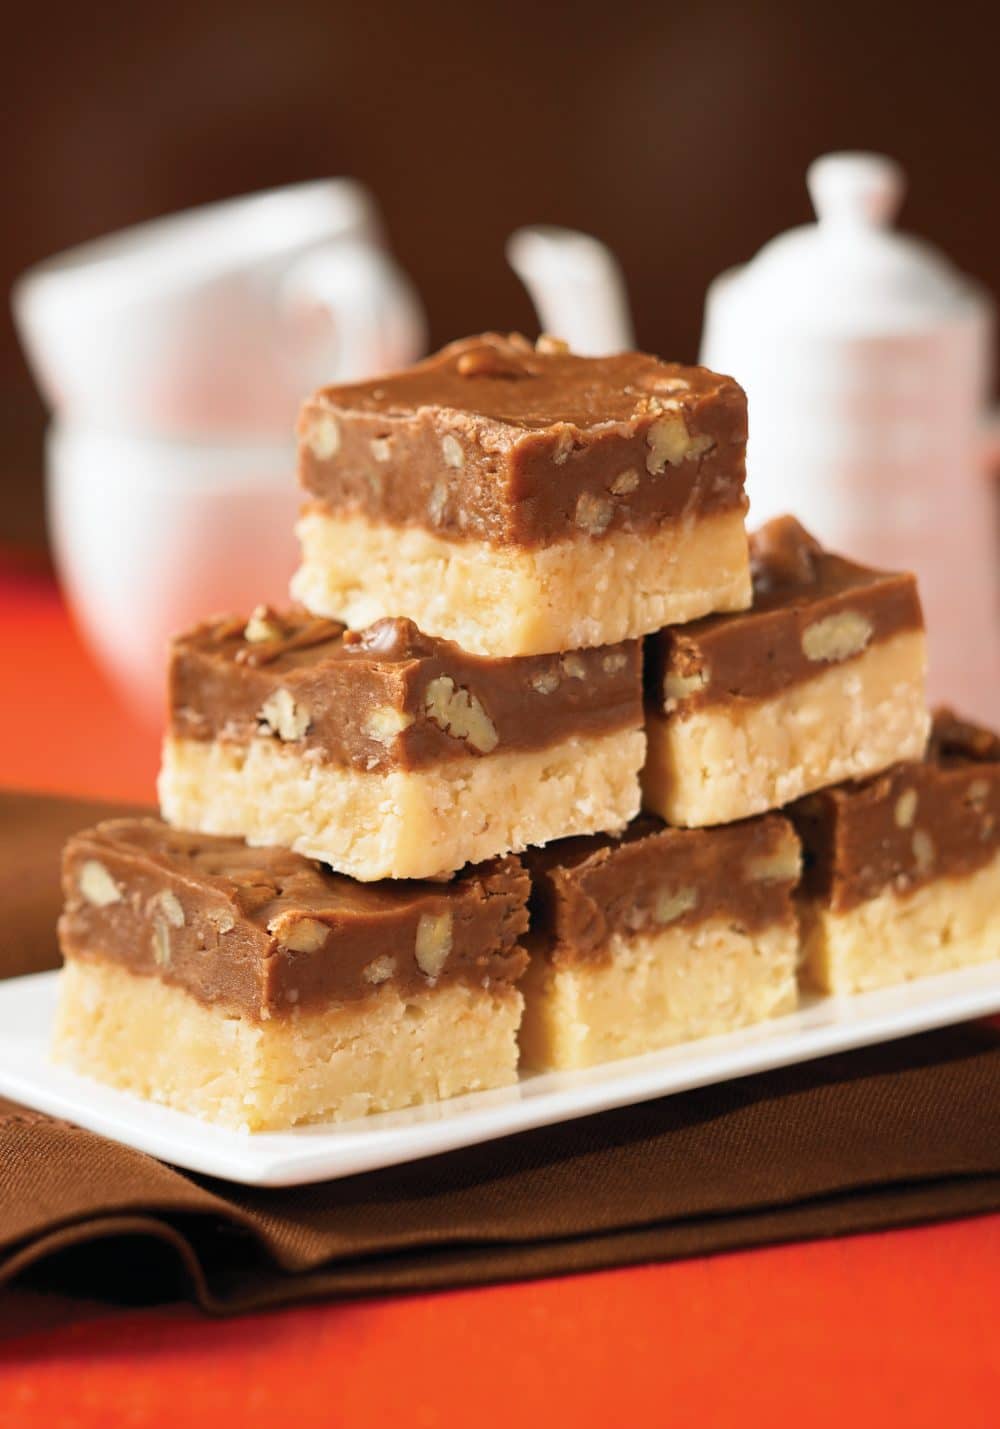 Homemade Marshmallows and Fudge from 300 Best Homemade Candy Recipes